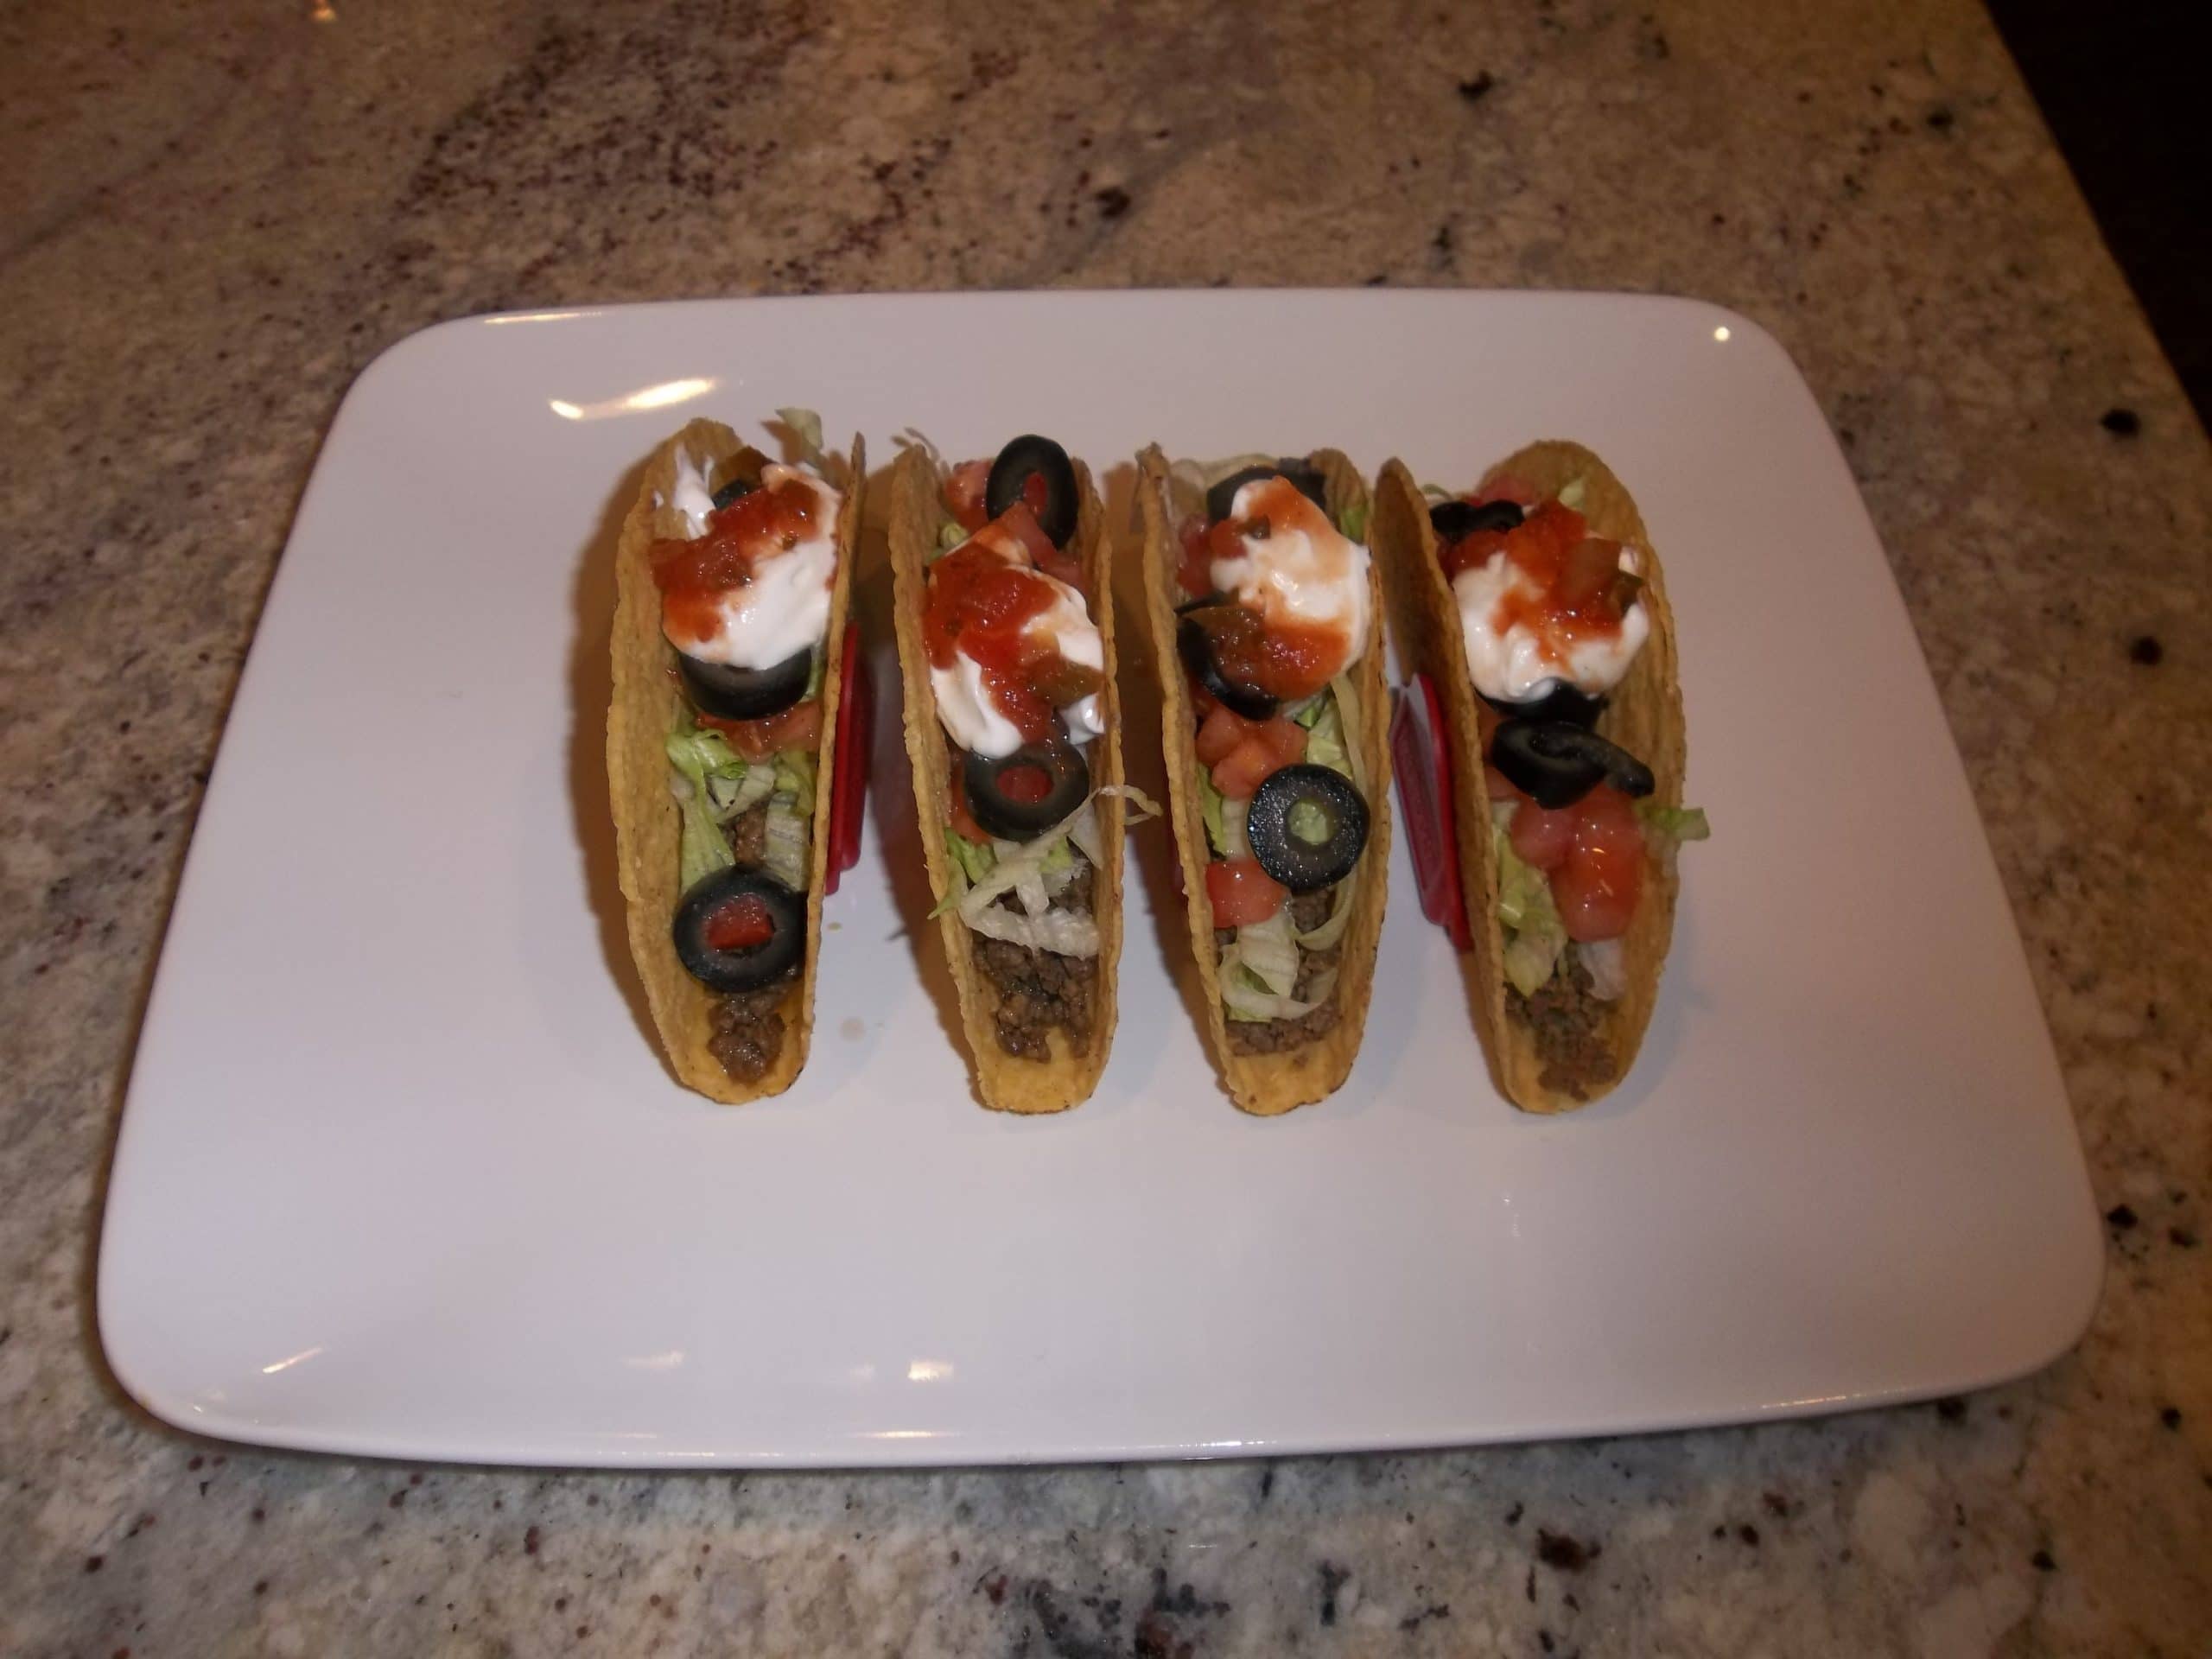 This is a front view of the tacos with taco poppers